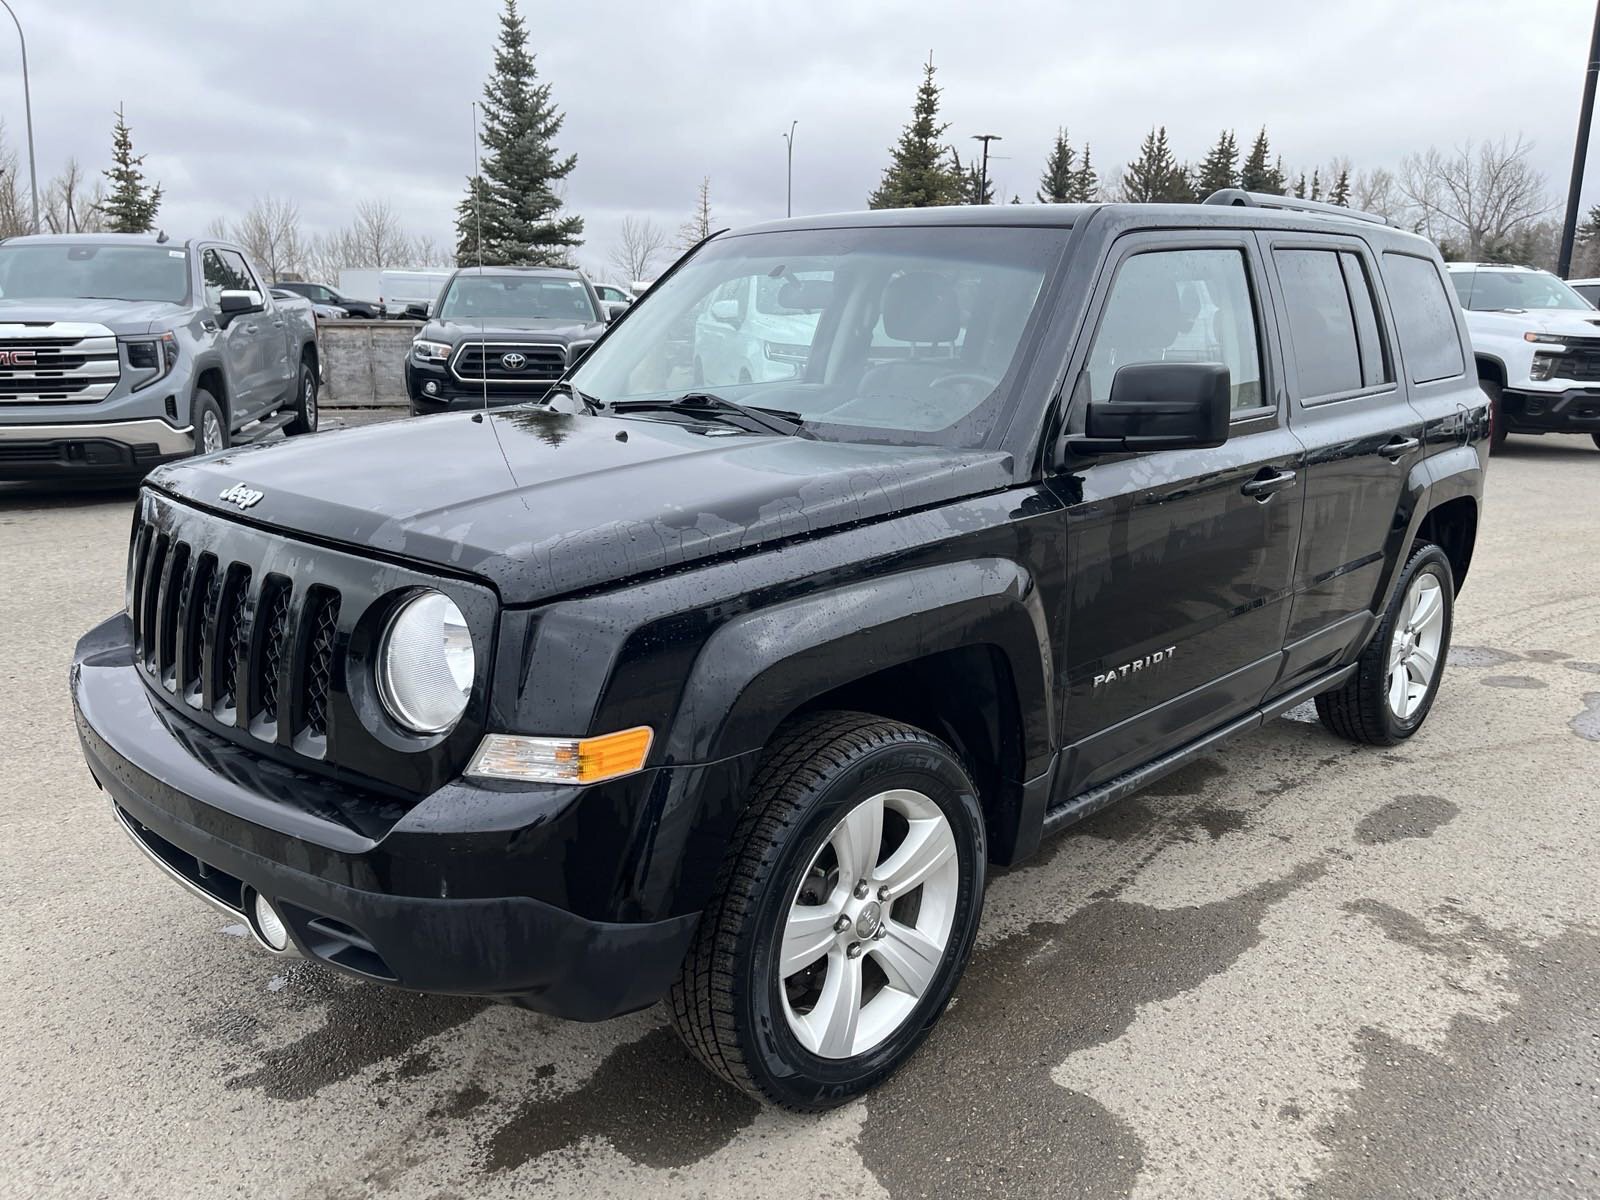 2014 Jeep Patriot Limited - 4WD LEATHER SUNROOF